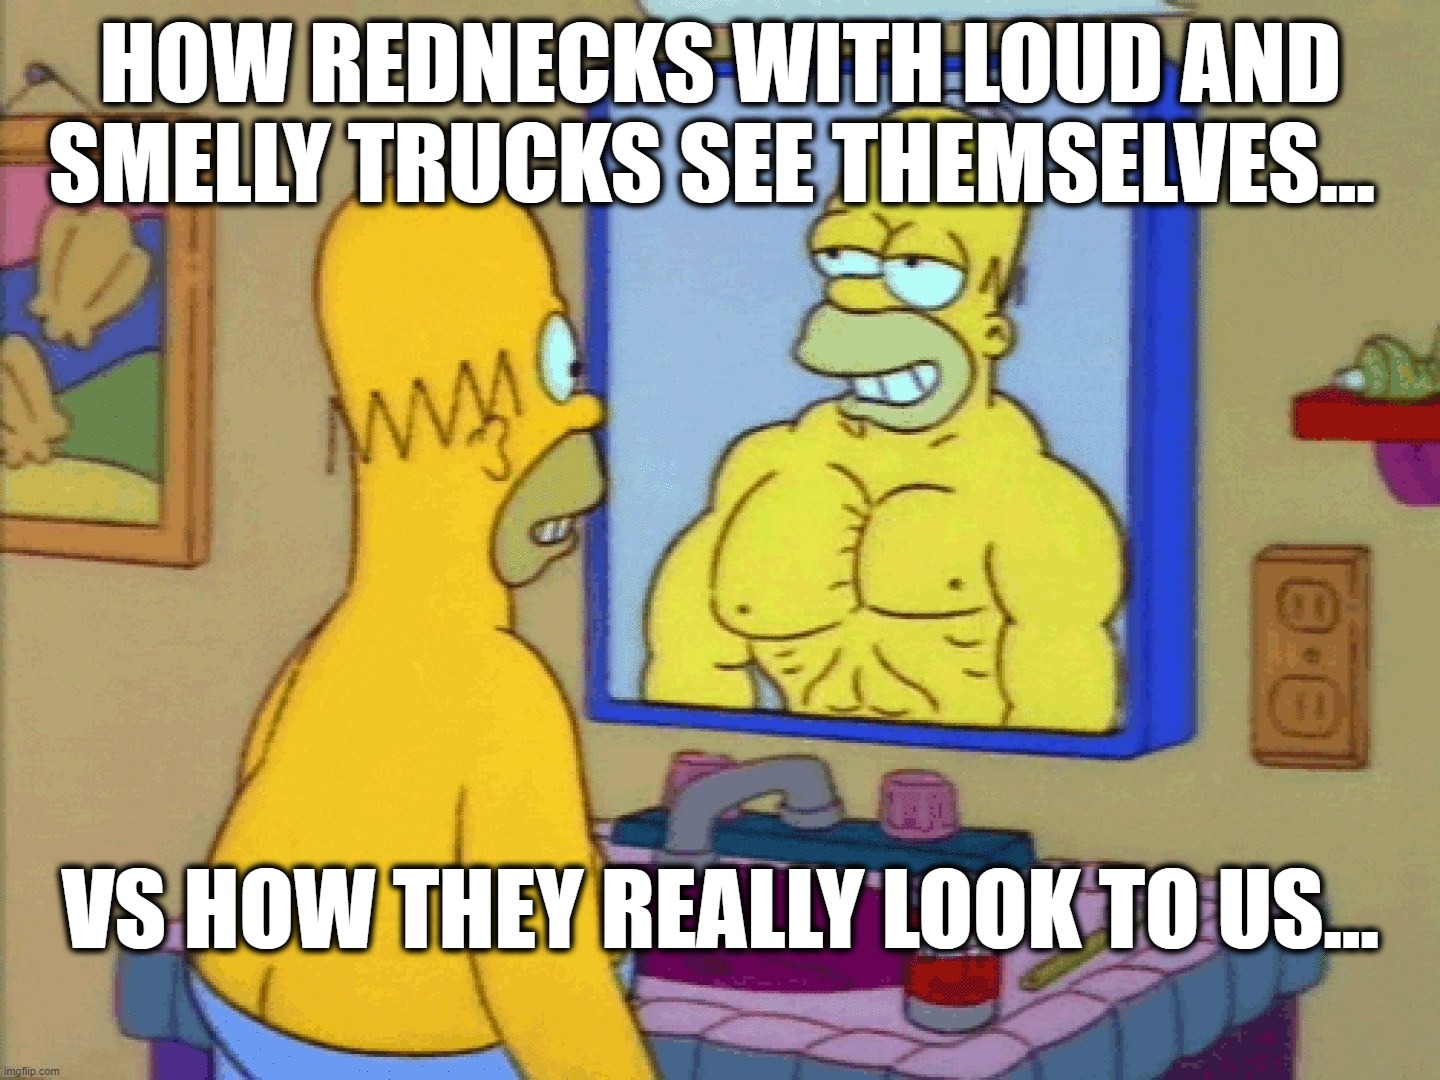 Rednecks | HOW REDNECKS WITH LOUD AND SMELLY TRUCKS SEE THEMSELVES... VS HOW THEY REALLY LOOK TO US... | image tagged in rednecks,loud trucks,smelly | made w/ Imgflip meme maker